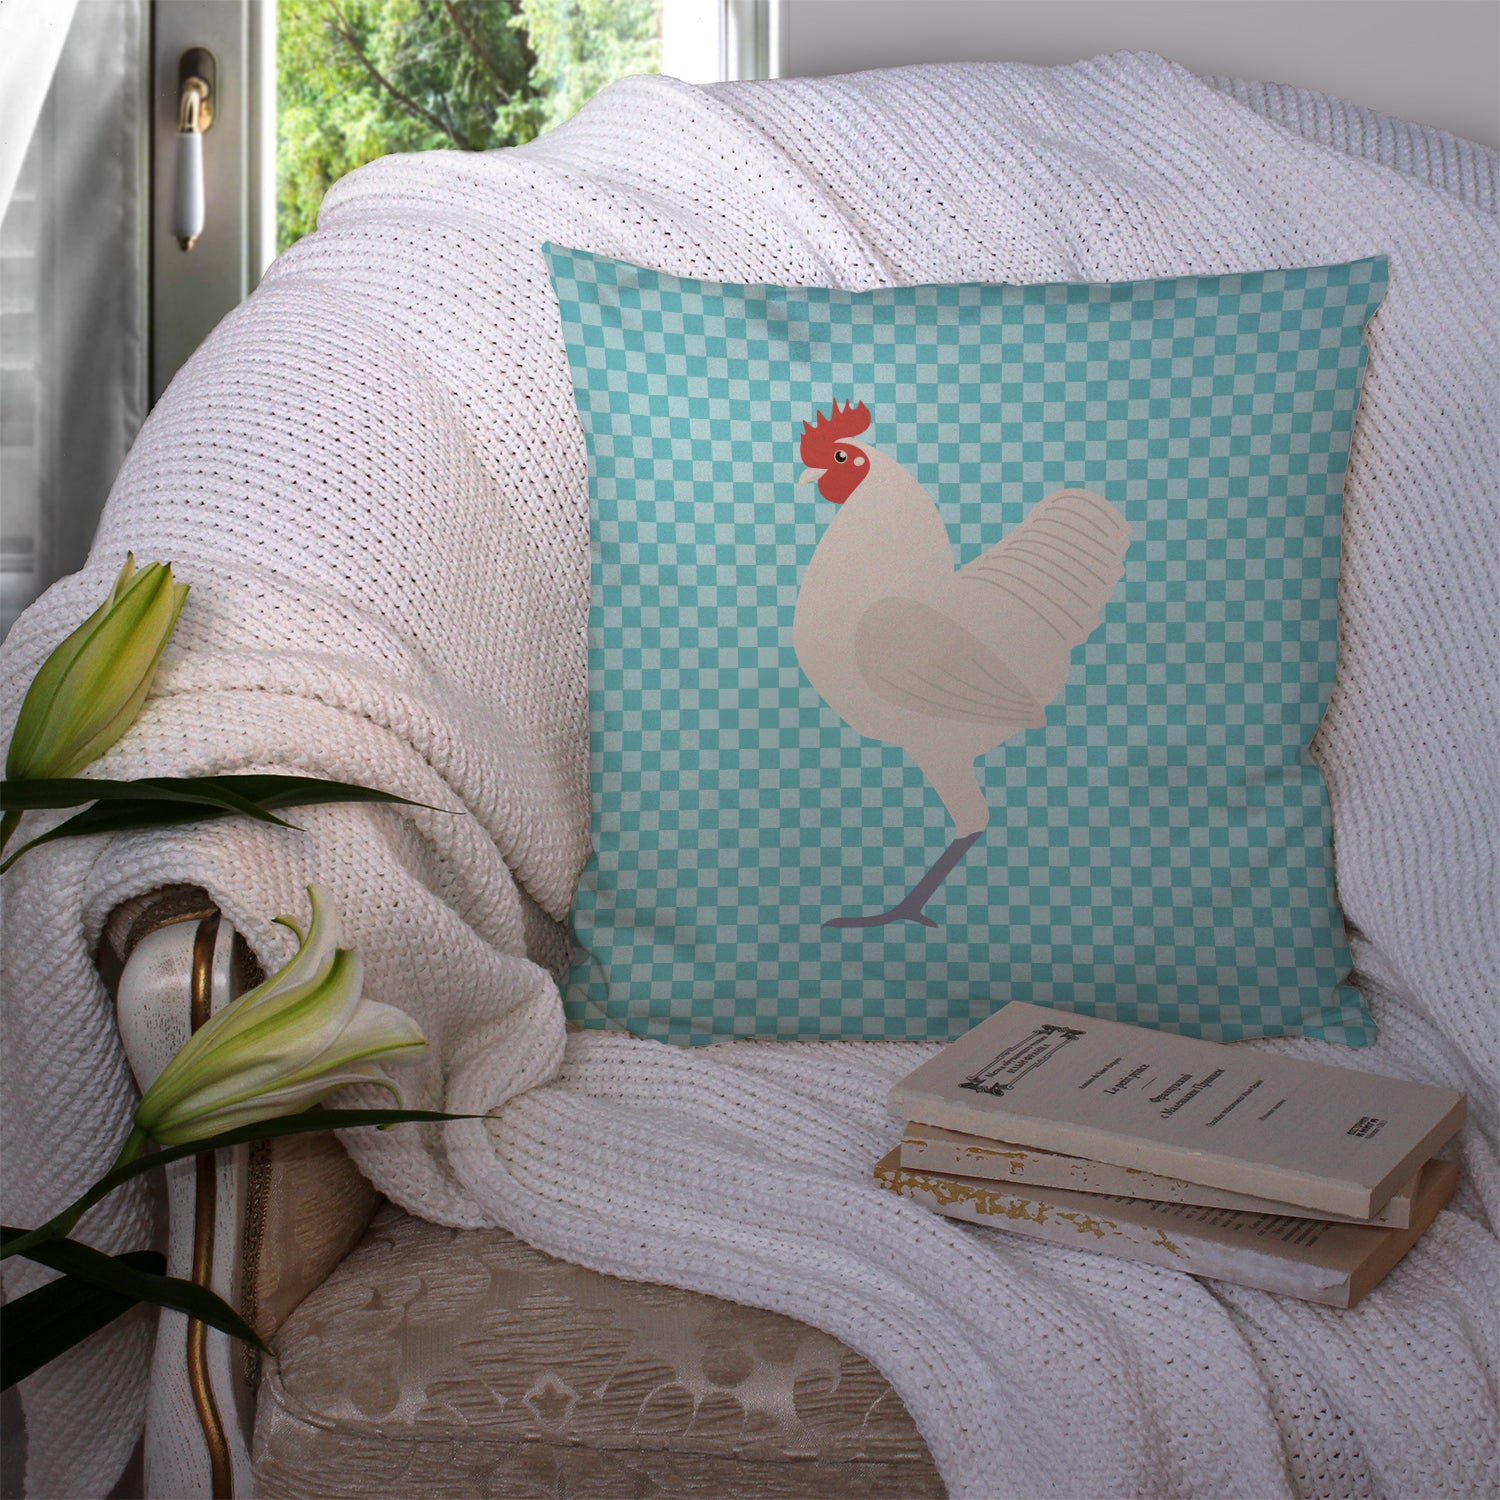 German Langshan Chicken Blue Check Fabric Decorative Pillow BB8011PW1414 - the-store.com